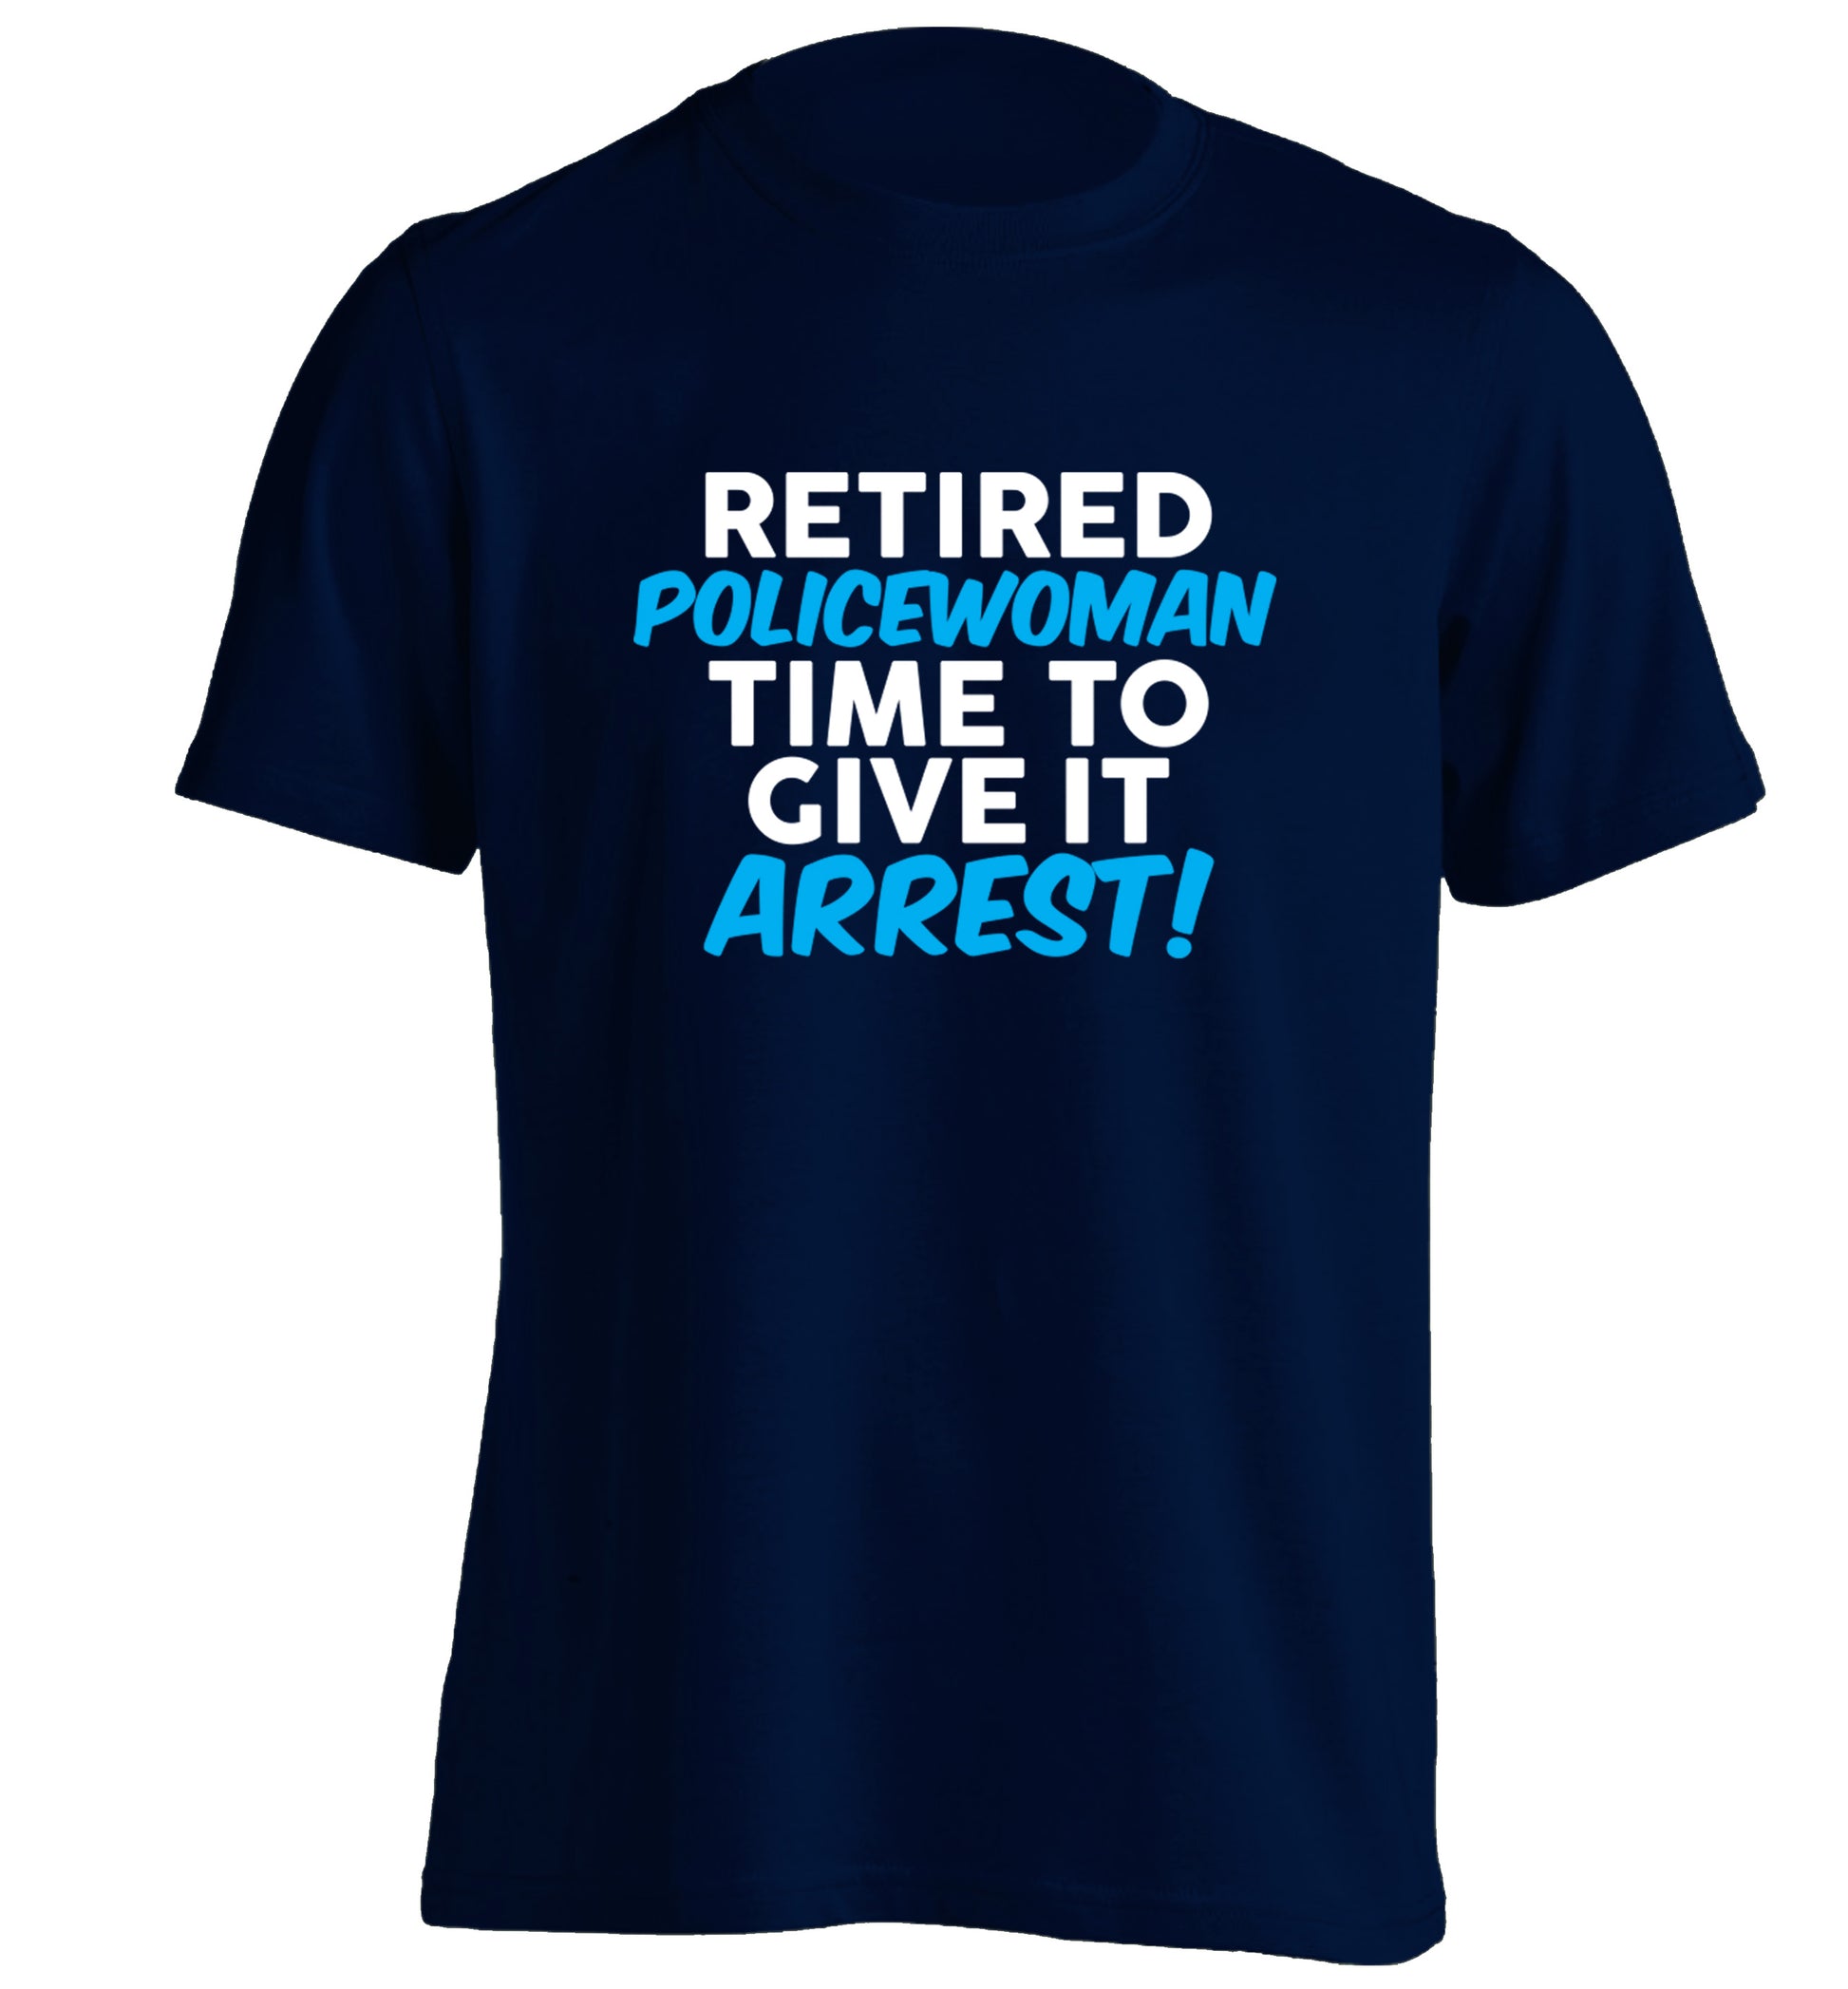 Retired policewoman time to give it arrest adults unisex navy Tshirt 2XL